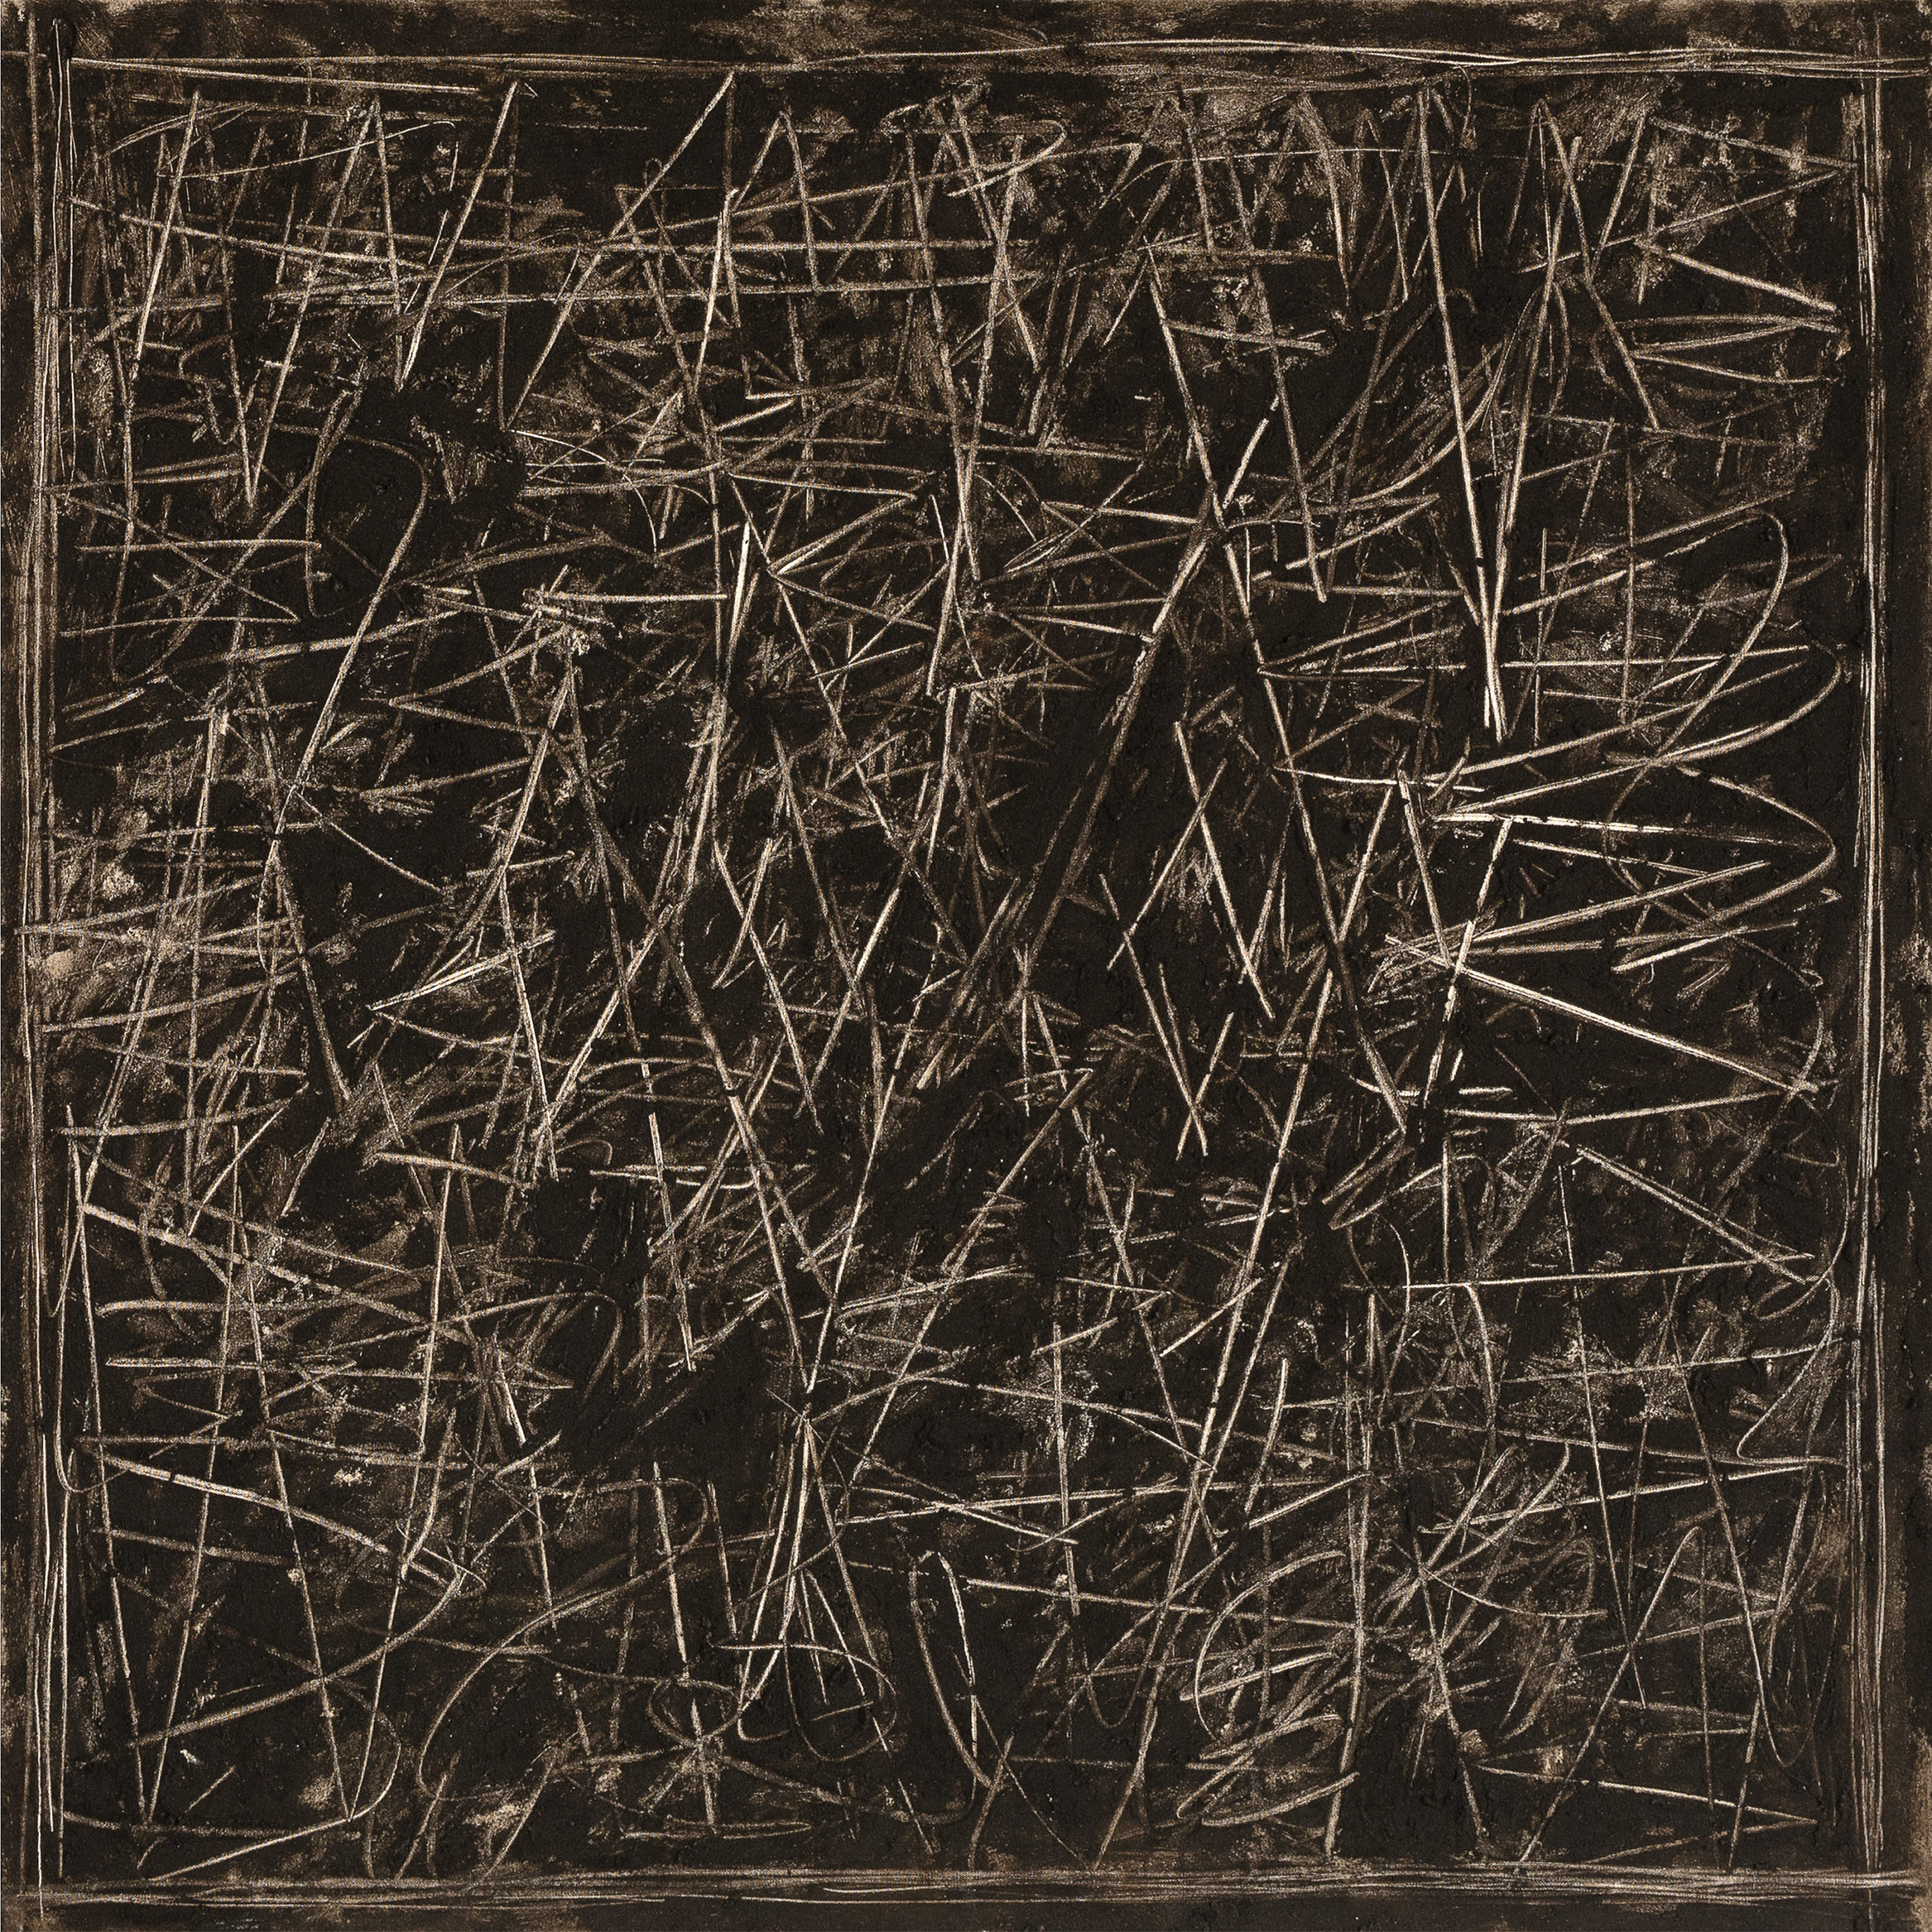 
		                					Patrick Dean Hubbell		                																	
																											<i>Chahaałeeł: A Gestural Pattern in the Darkness,</i>  
																																								2022, 
																																								oil, natural earth pigment on canvas, 
																																								48 x 48 x 1 1/2 inches 
																								
		                				